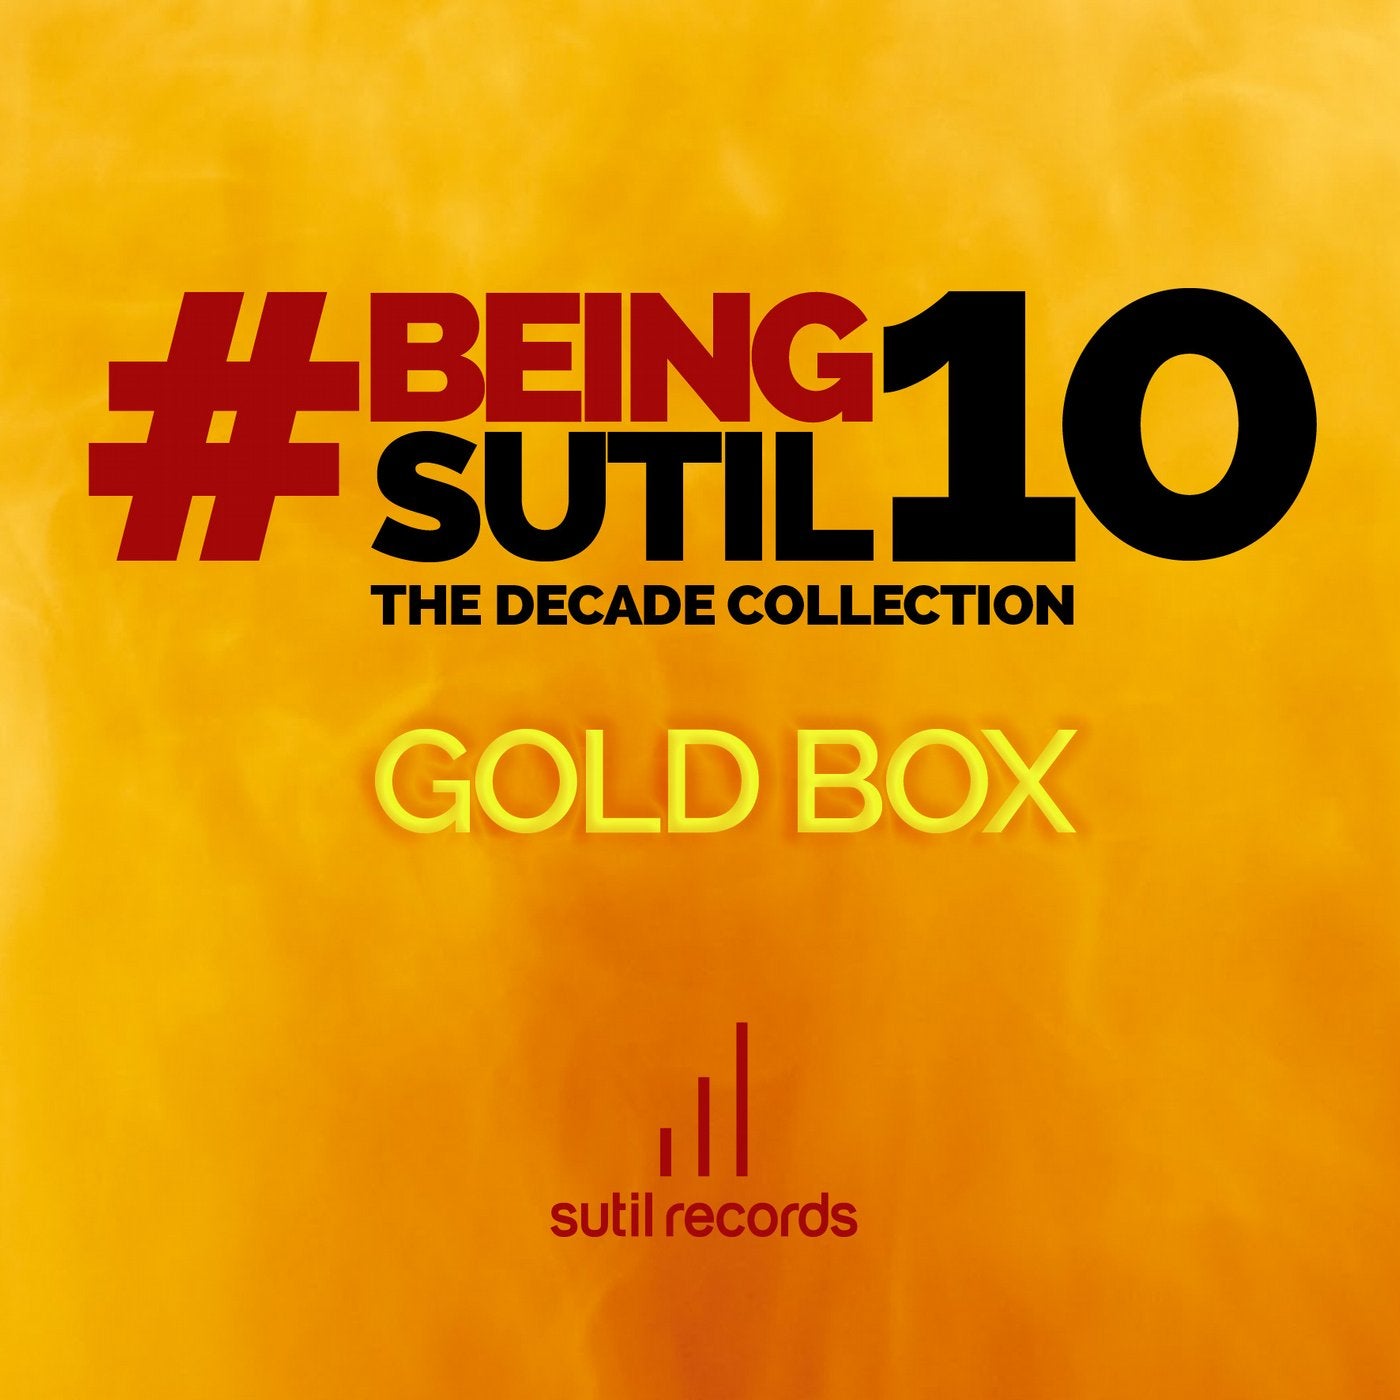 #BeingSutil10 - The Decade Collection - Gold Box